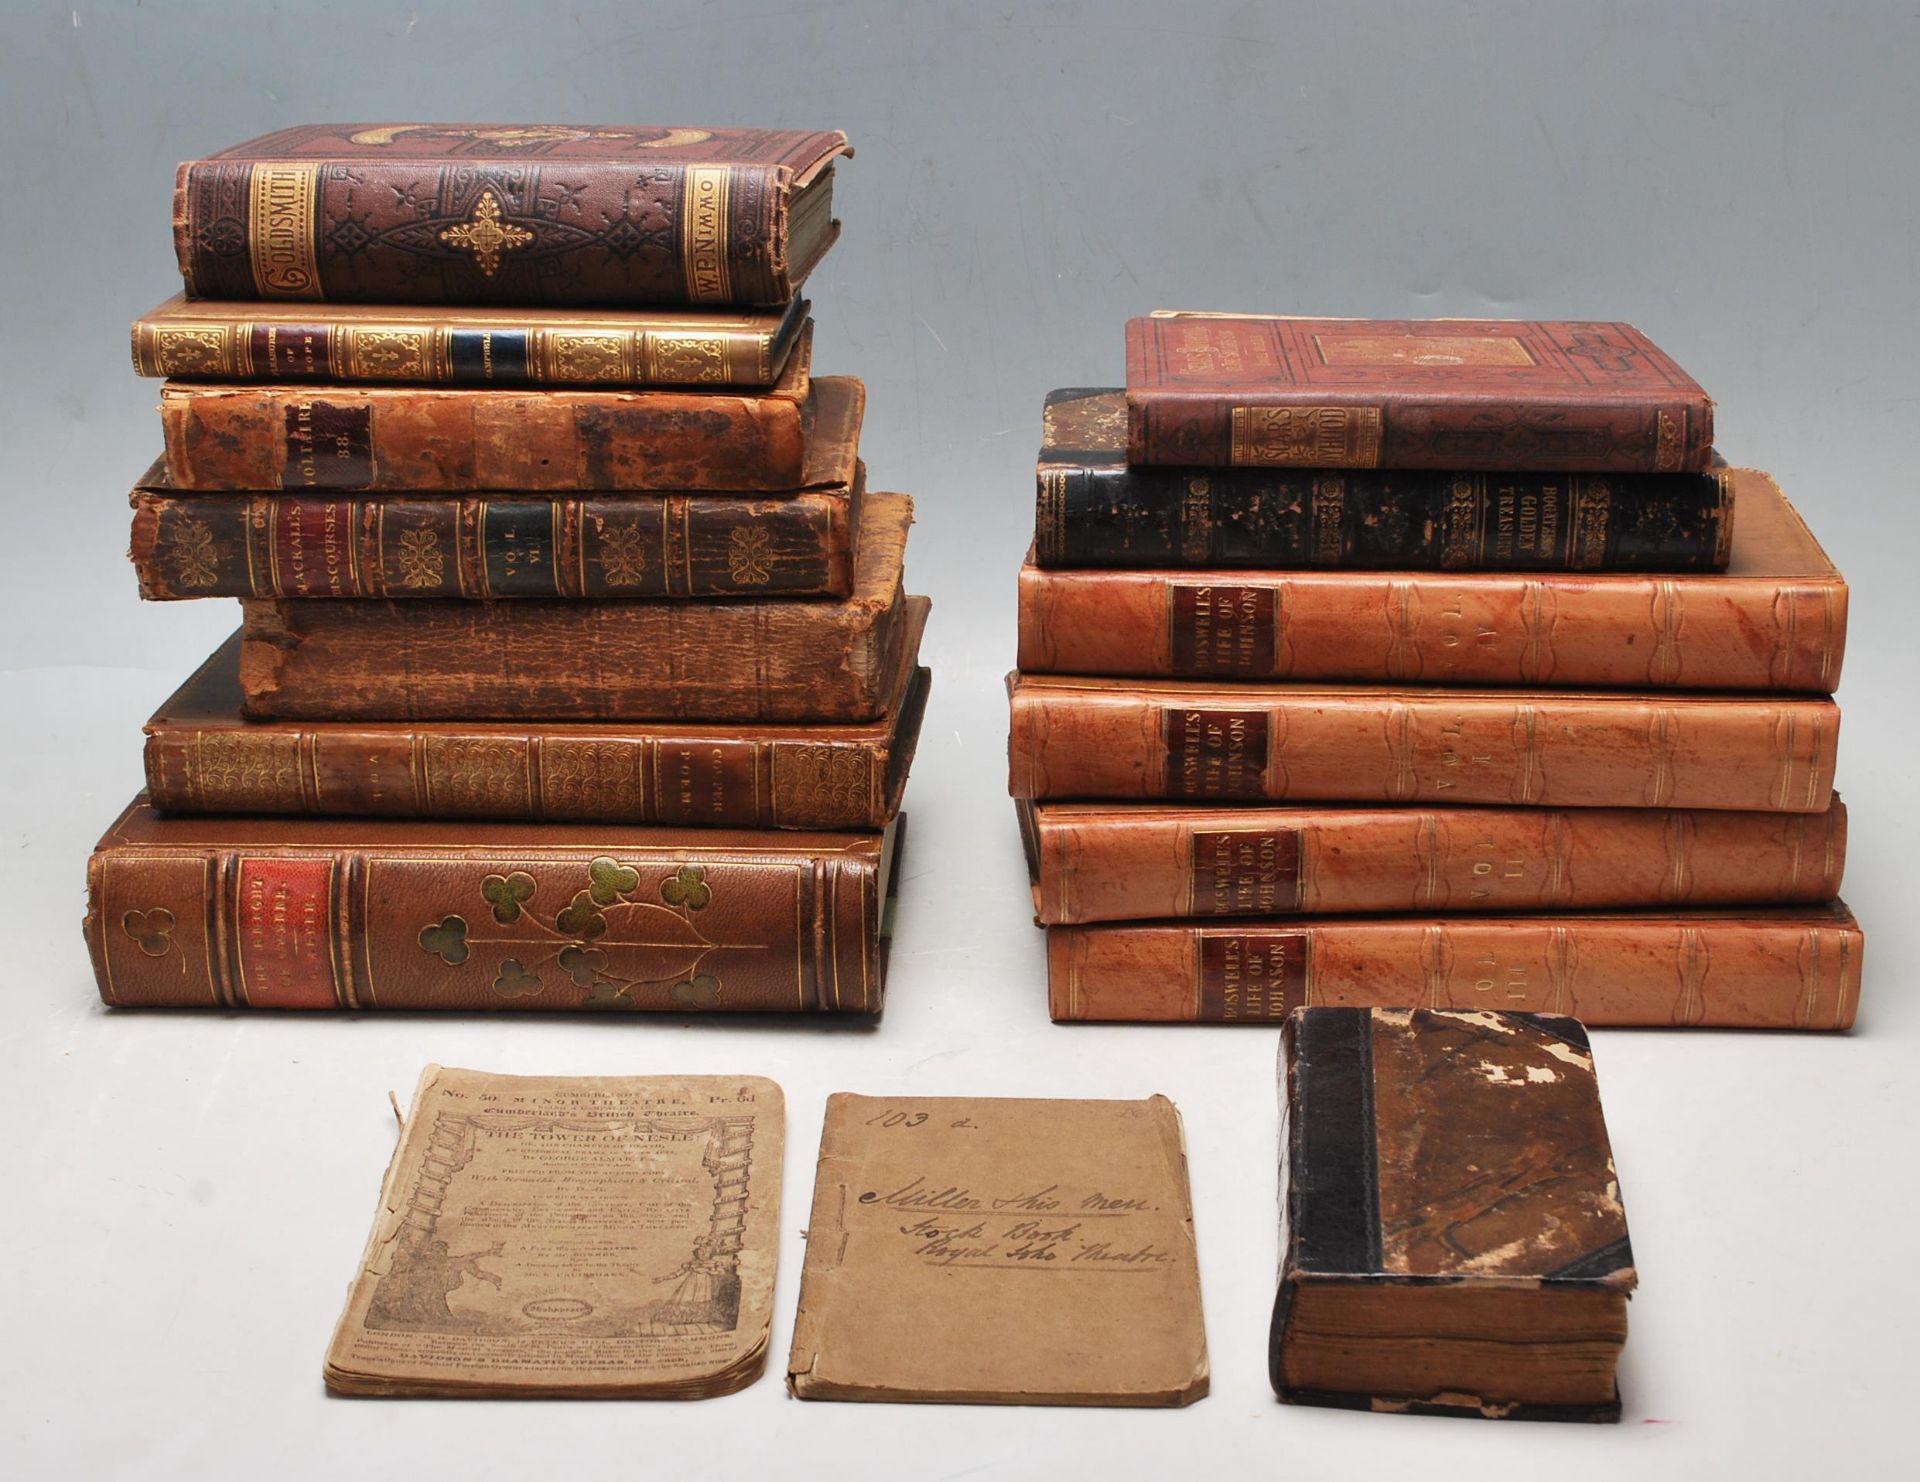 OF ANTIQUARIAN INTEREST - A COLLECTION OF ANTIQUE 18TH CENTURY AND LATER HARDCOVER BOOKS